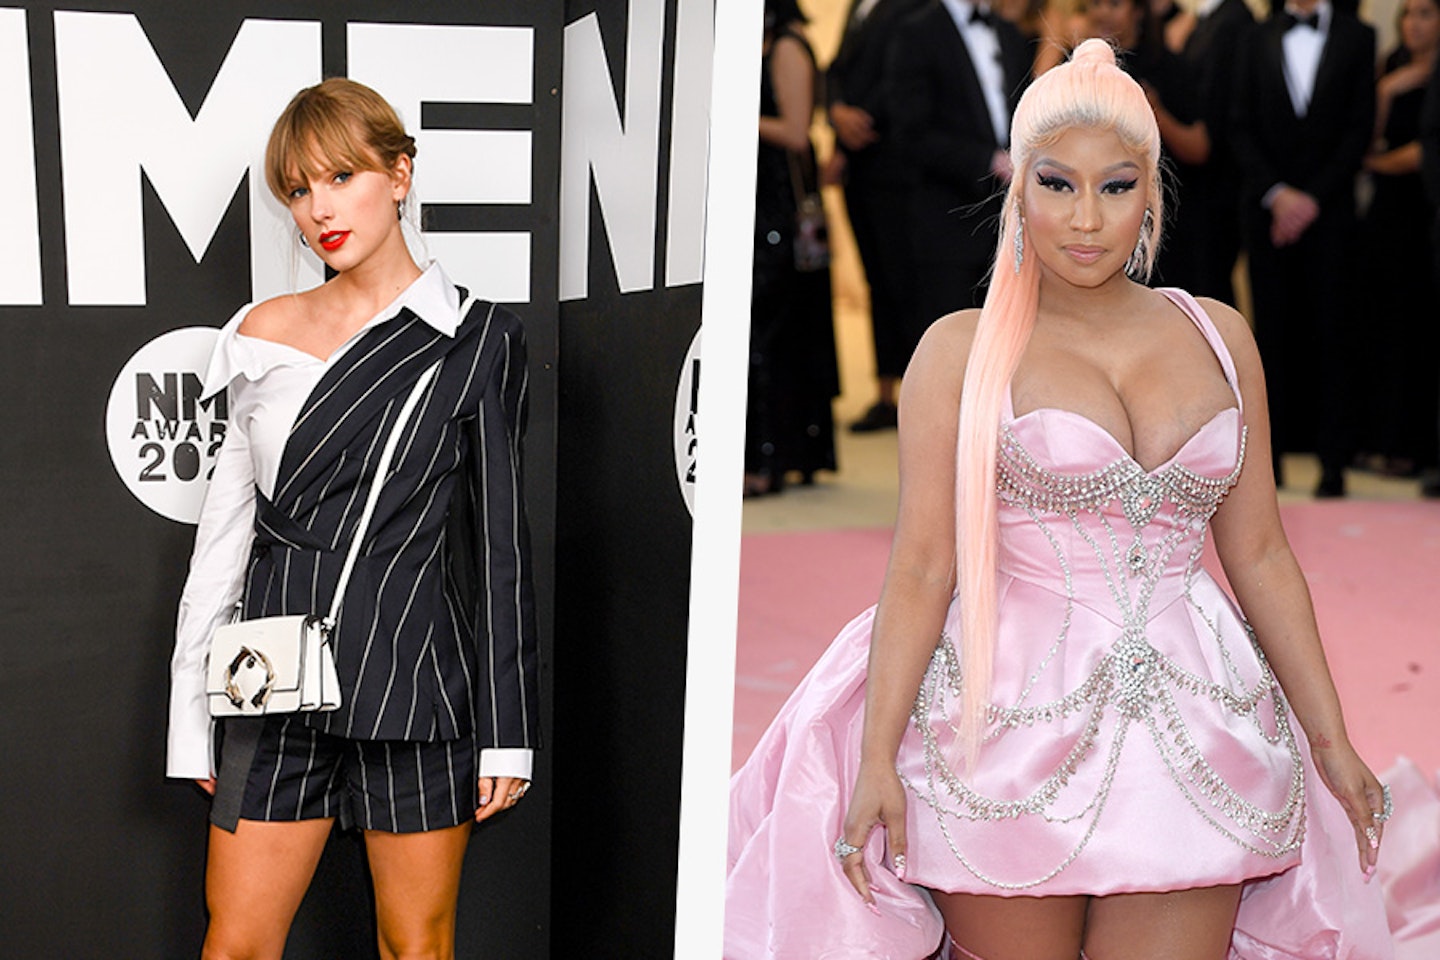 Left- Taylor Swift poses with the Best Solo Act In The World Award in the winner room at the NME Awards 2020 at O2 Academy Brixton London 2020. Right- Nicki Minaj attends The 2019 Met Gala.